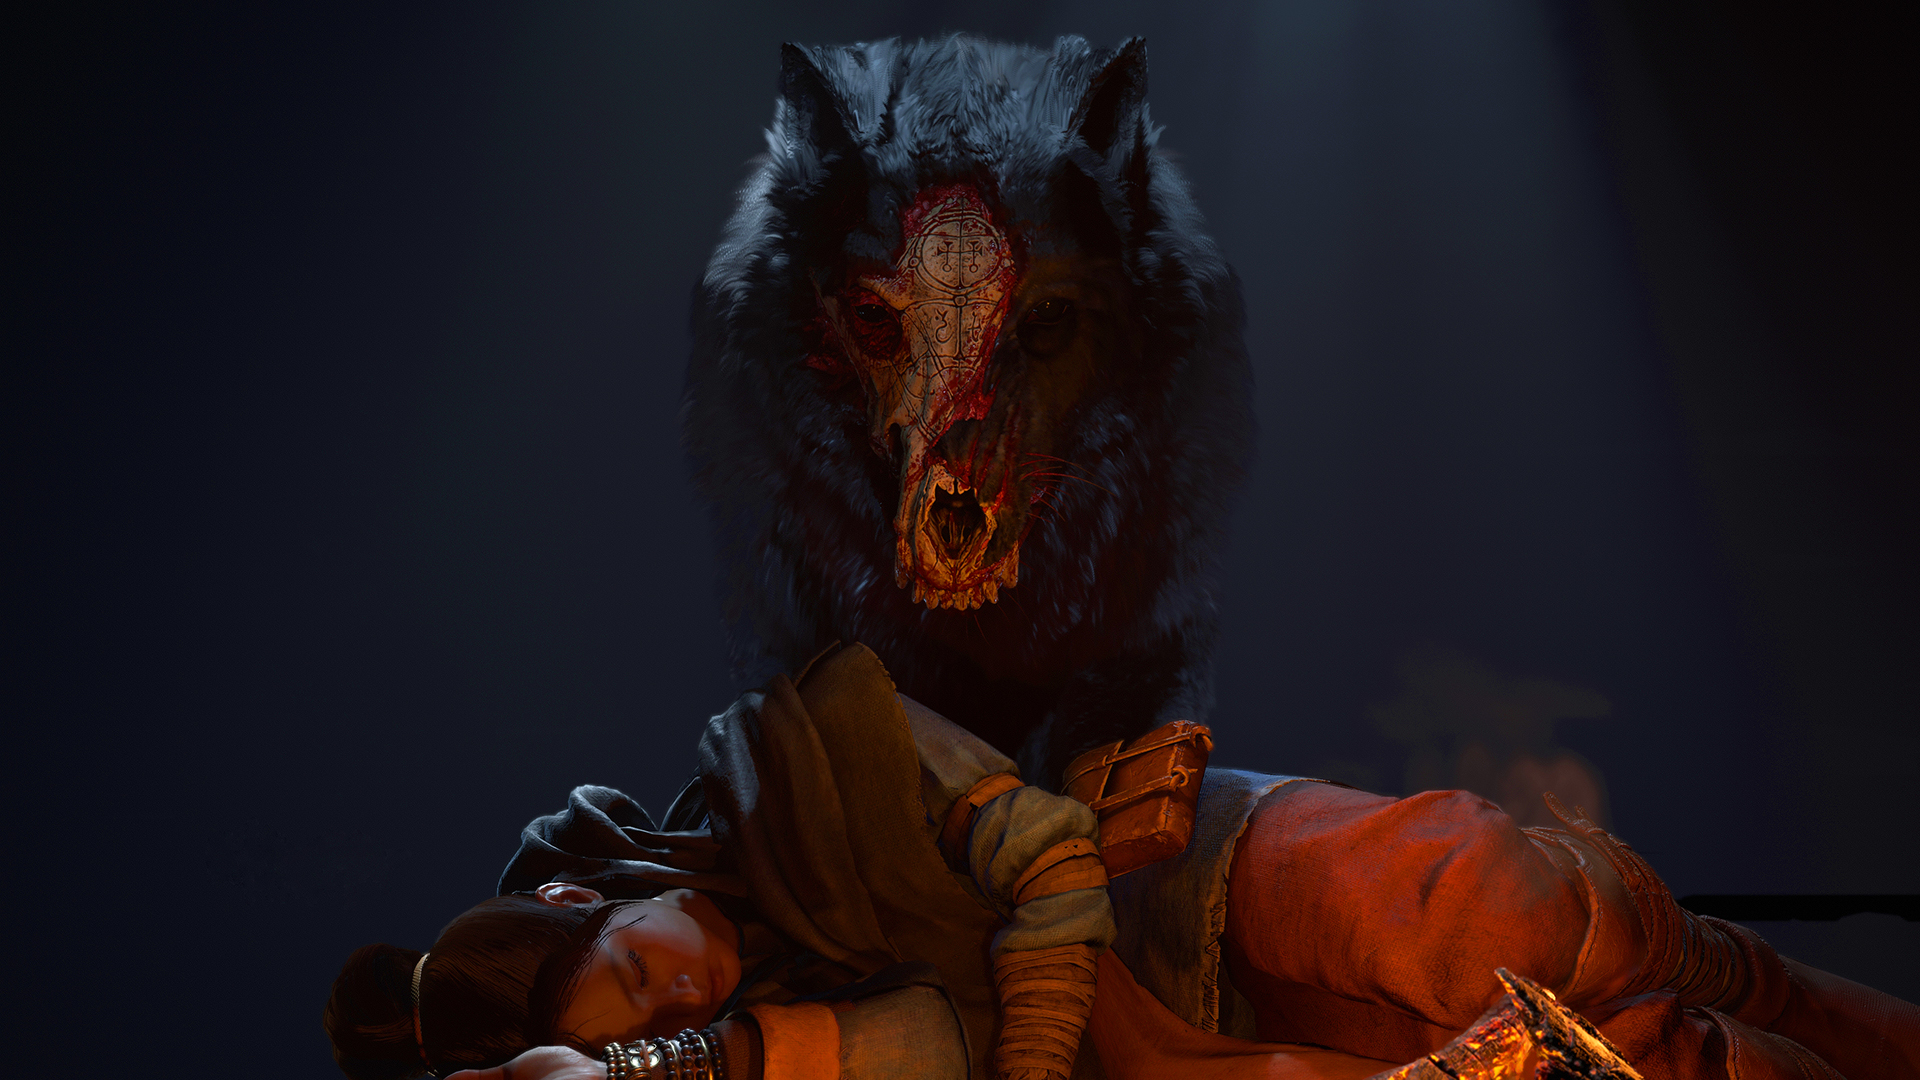 Diablo 4 cutscene still of a wolf with a skeletal face looming over a young girl